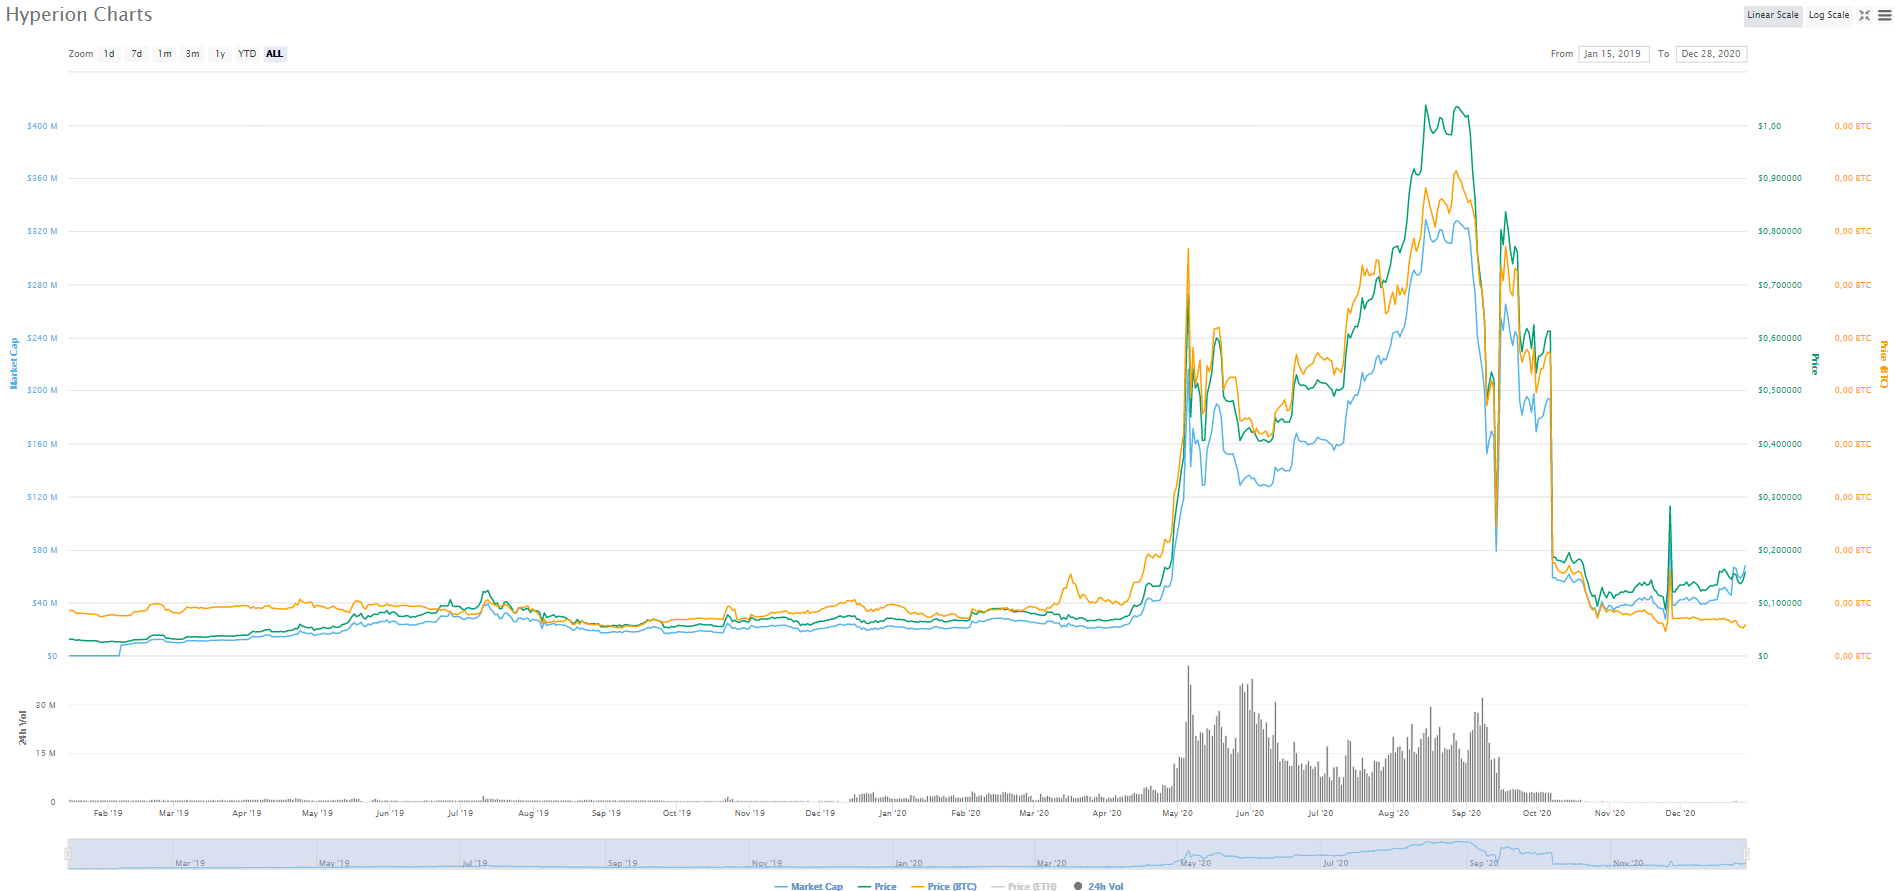 Hyperion price today, HYN marketcap, chart, and in